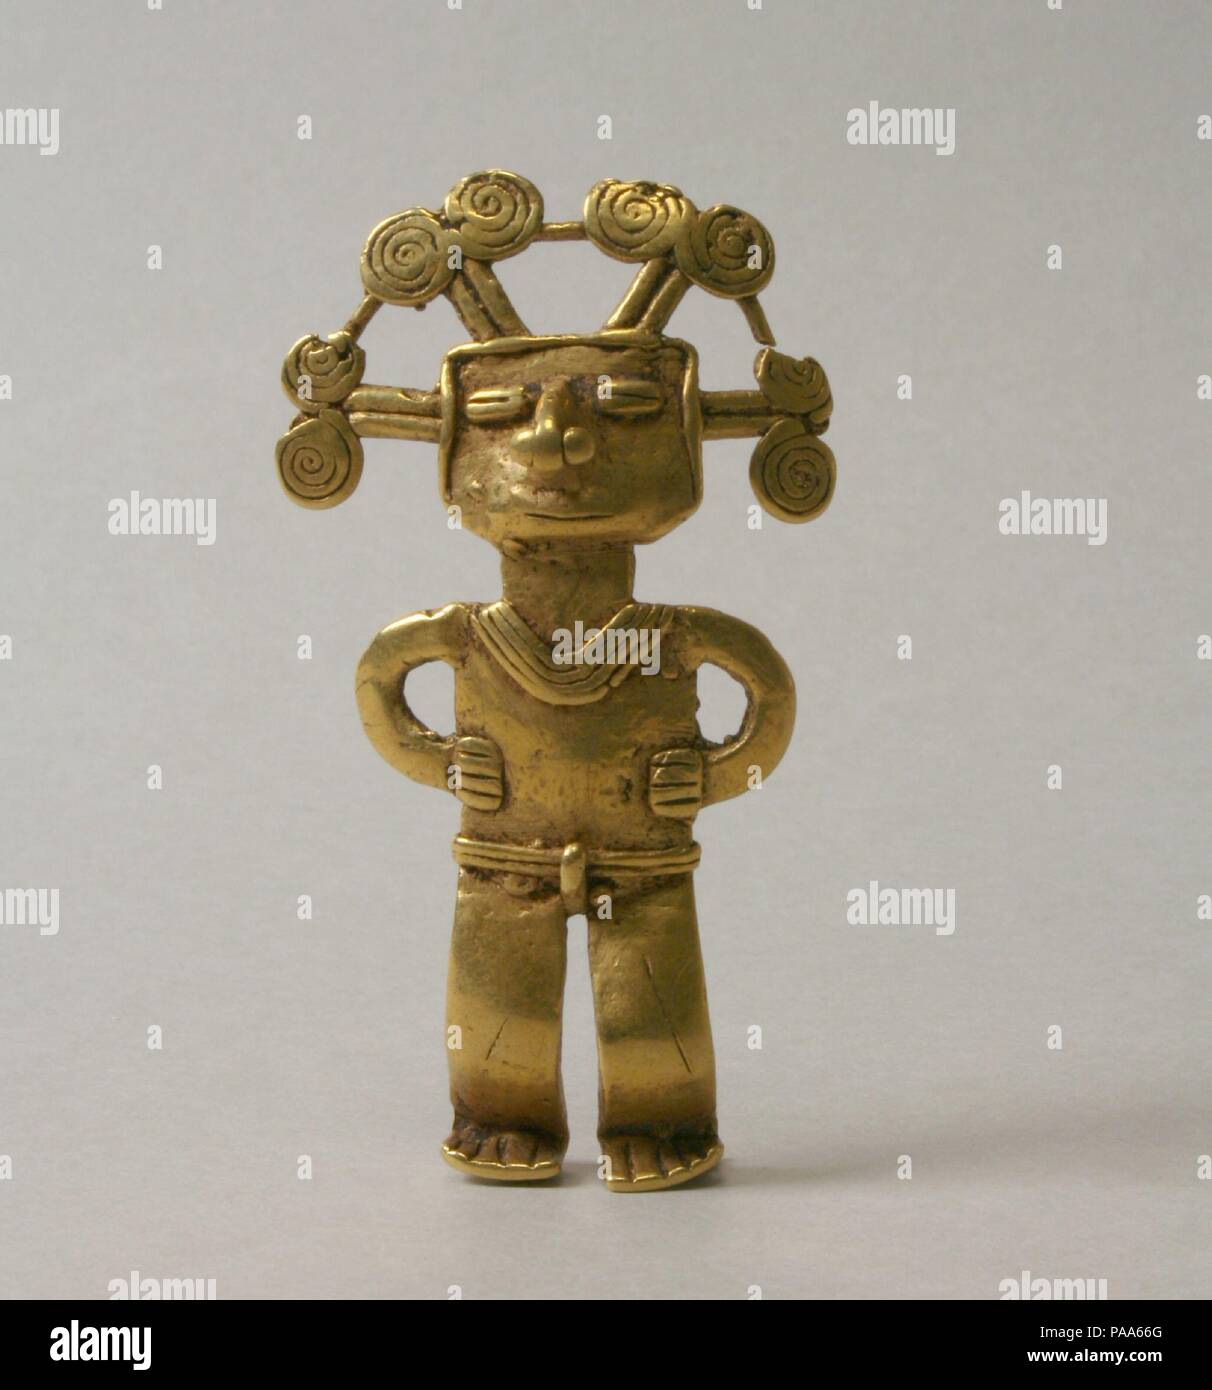 Figure Pendant. Culture: Colombia. Dimensions: Height 2-1/2 in. (6.4 cm). Date: 5th-10th century. Museum: Metropolitan Museum of Art, New York, USA. Stock Photo